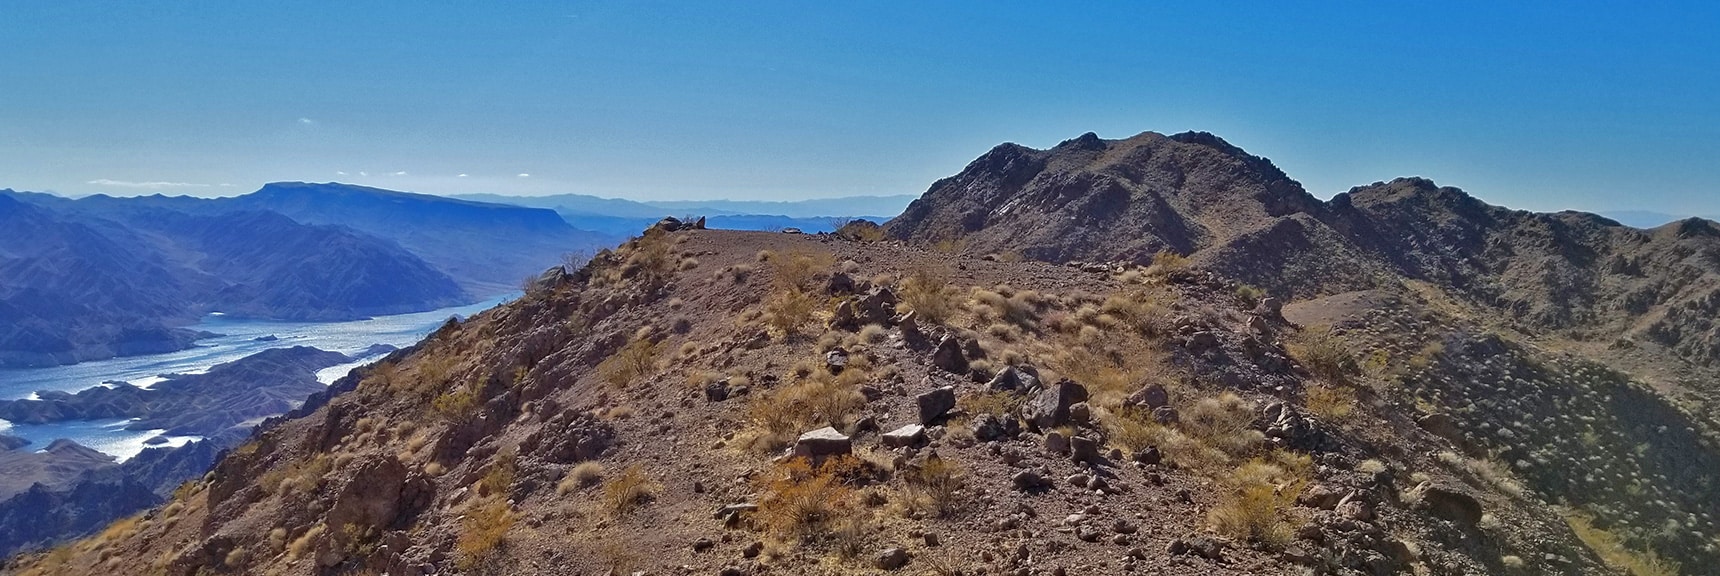 First View of Lake Mead from a Summit Ridge to the North of Hamblin Mt. | Hamblin Mountain, Lake Mead National Conservation Area, Nevada